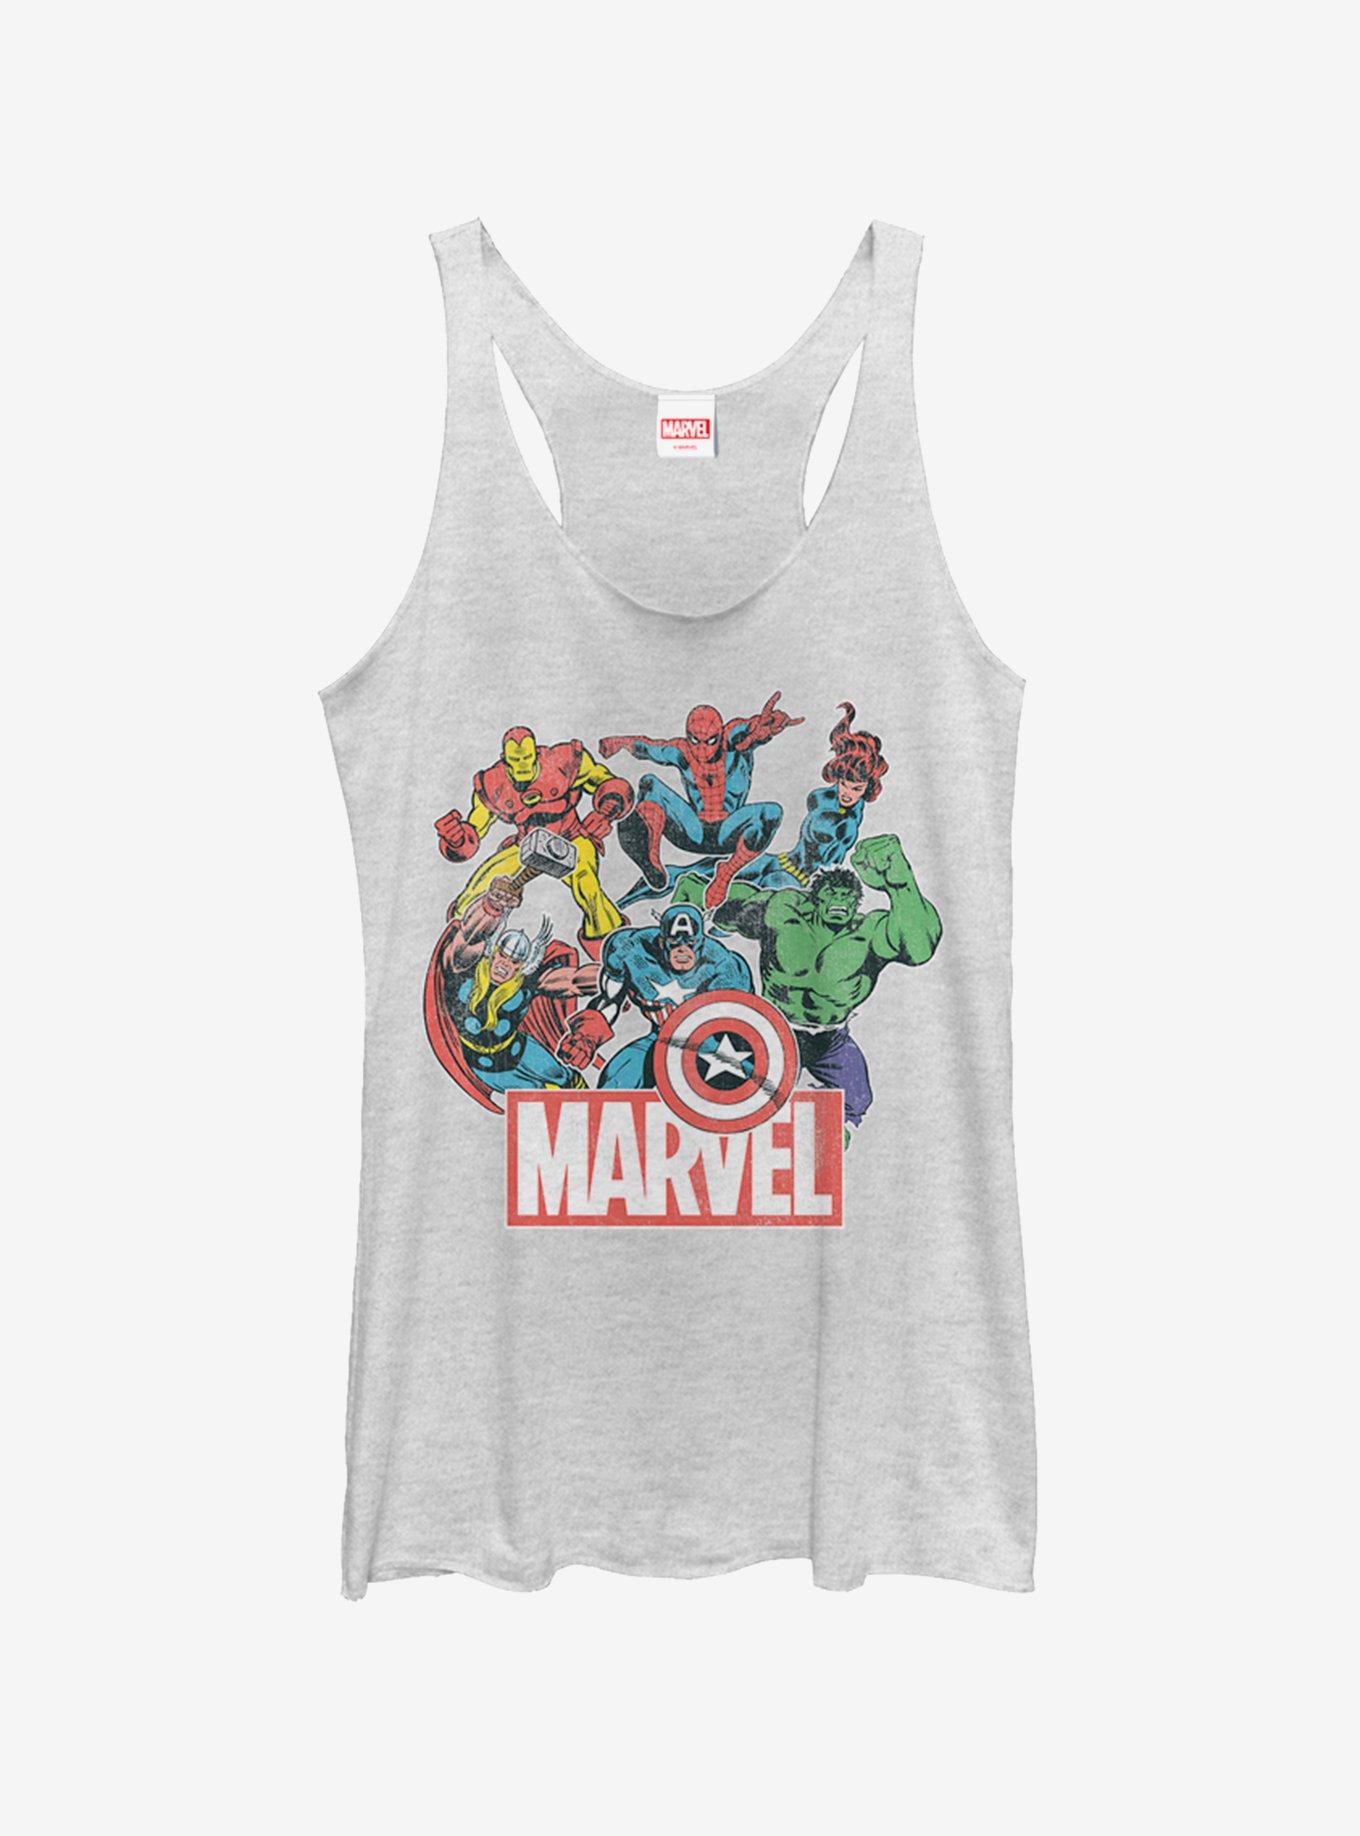 Marvel Heroes of Today Girls Tank, WHITE HTR, hi-res